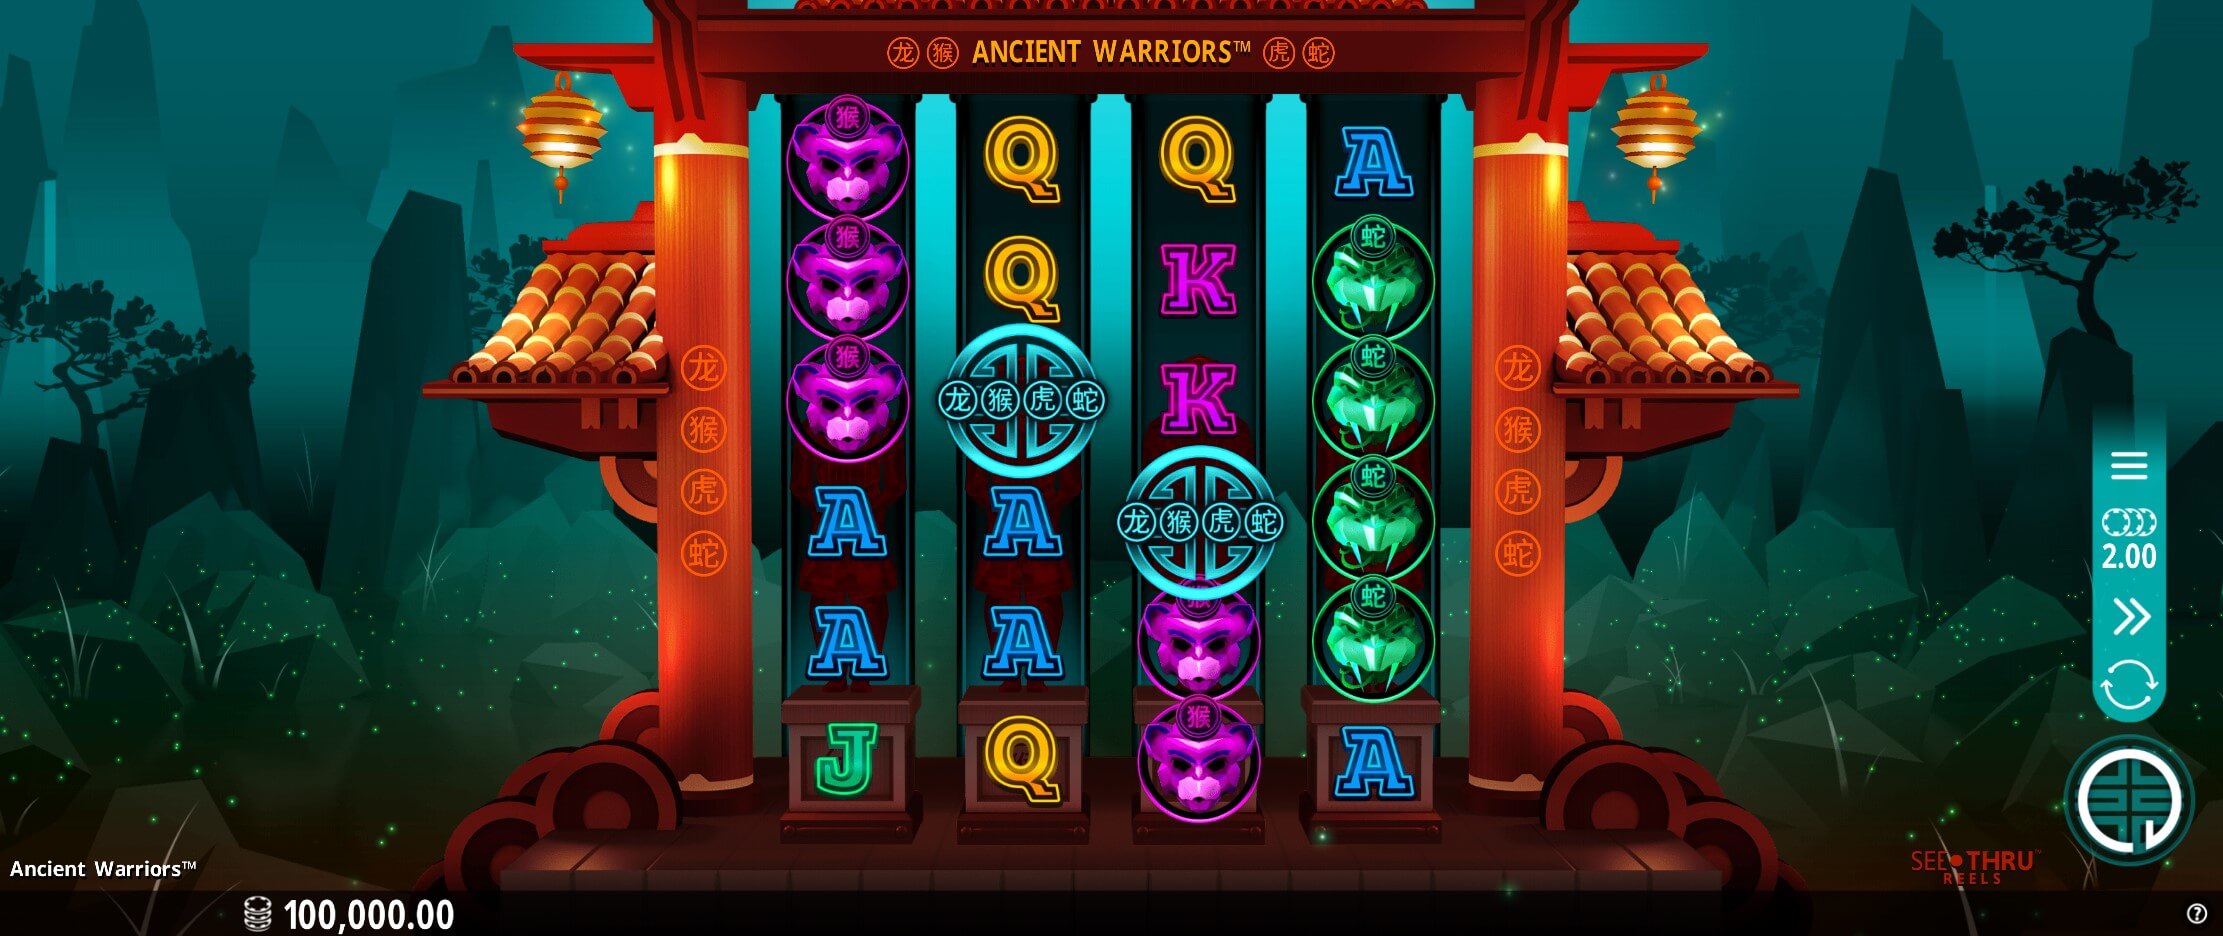 Ancient Warriors Slot Free Demo Play or for Real Money - Correct Casinos